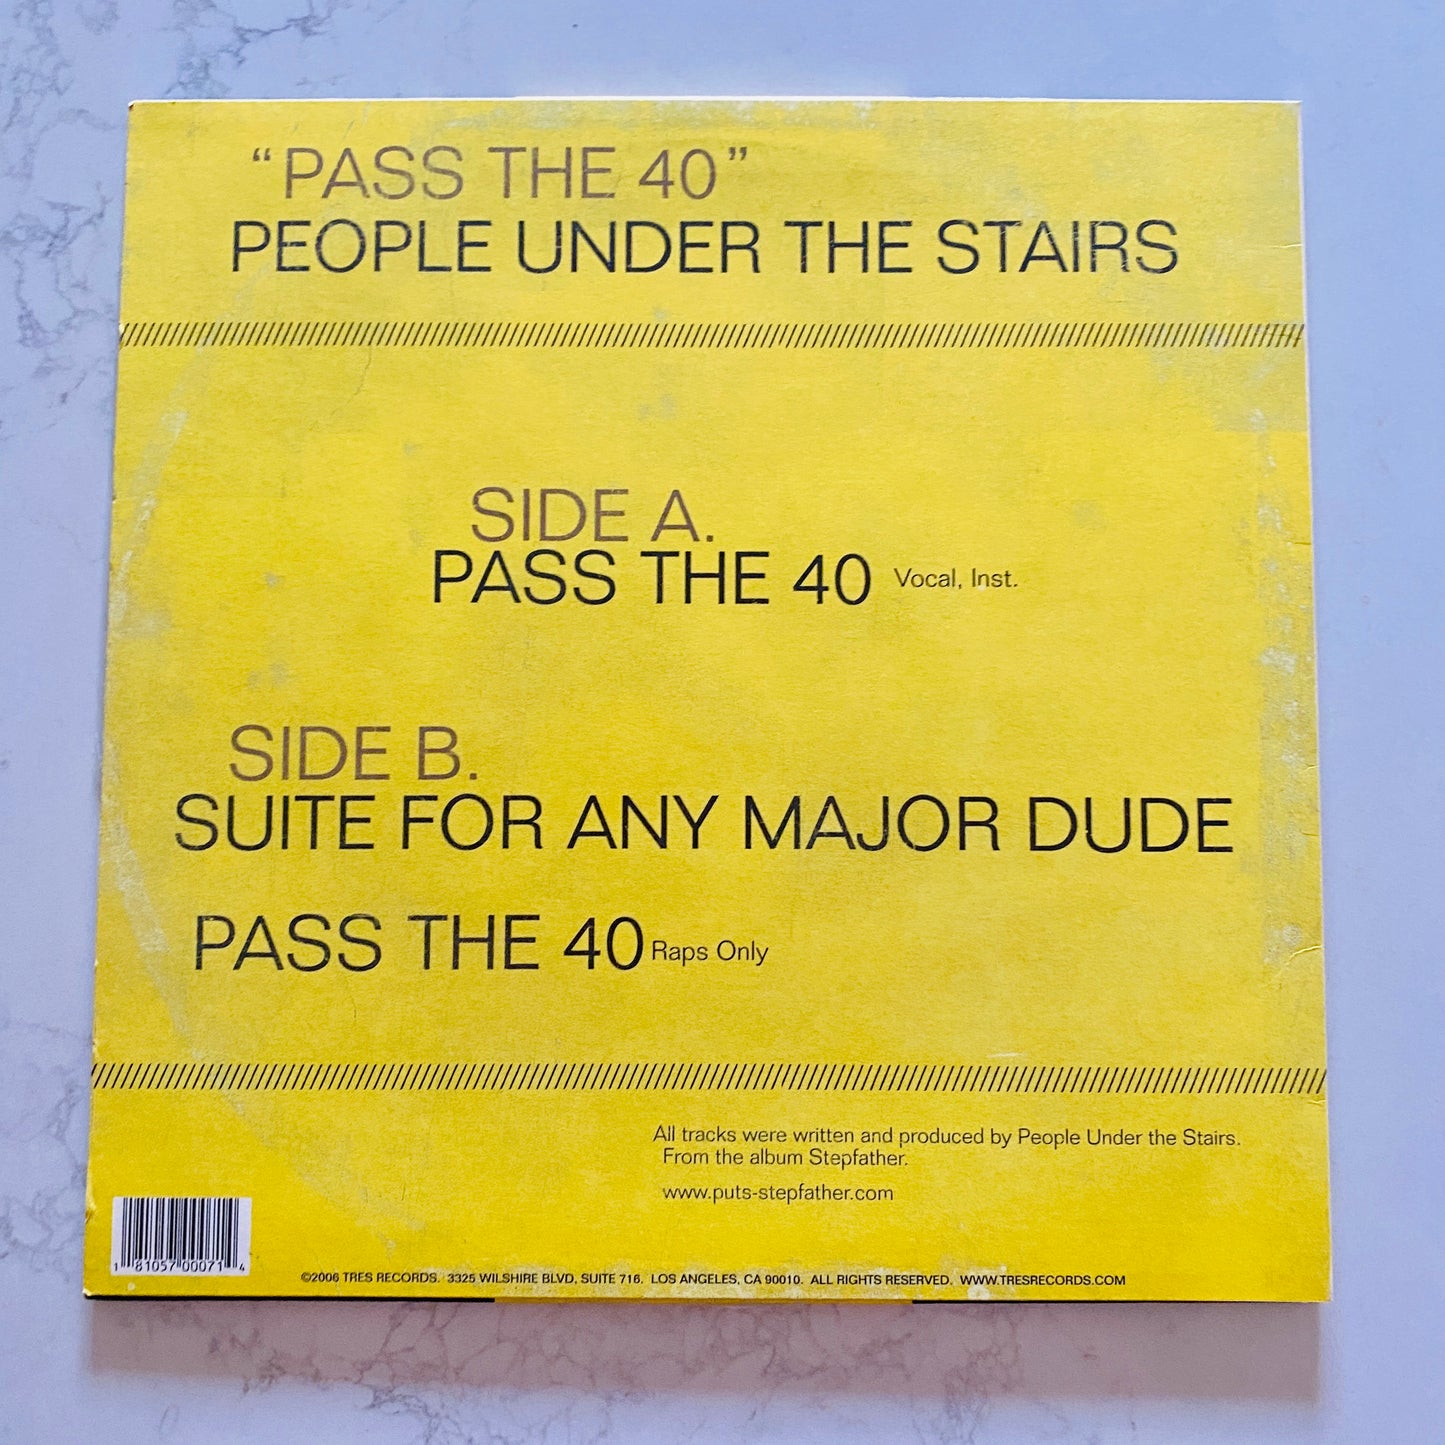 People Under The Stairs - Pass The 40 (12", Single). 12" HIP-HOP